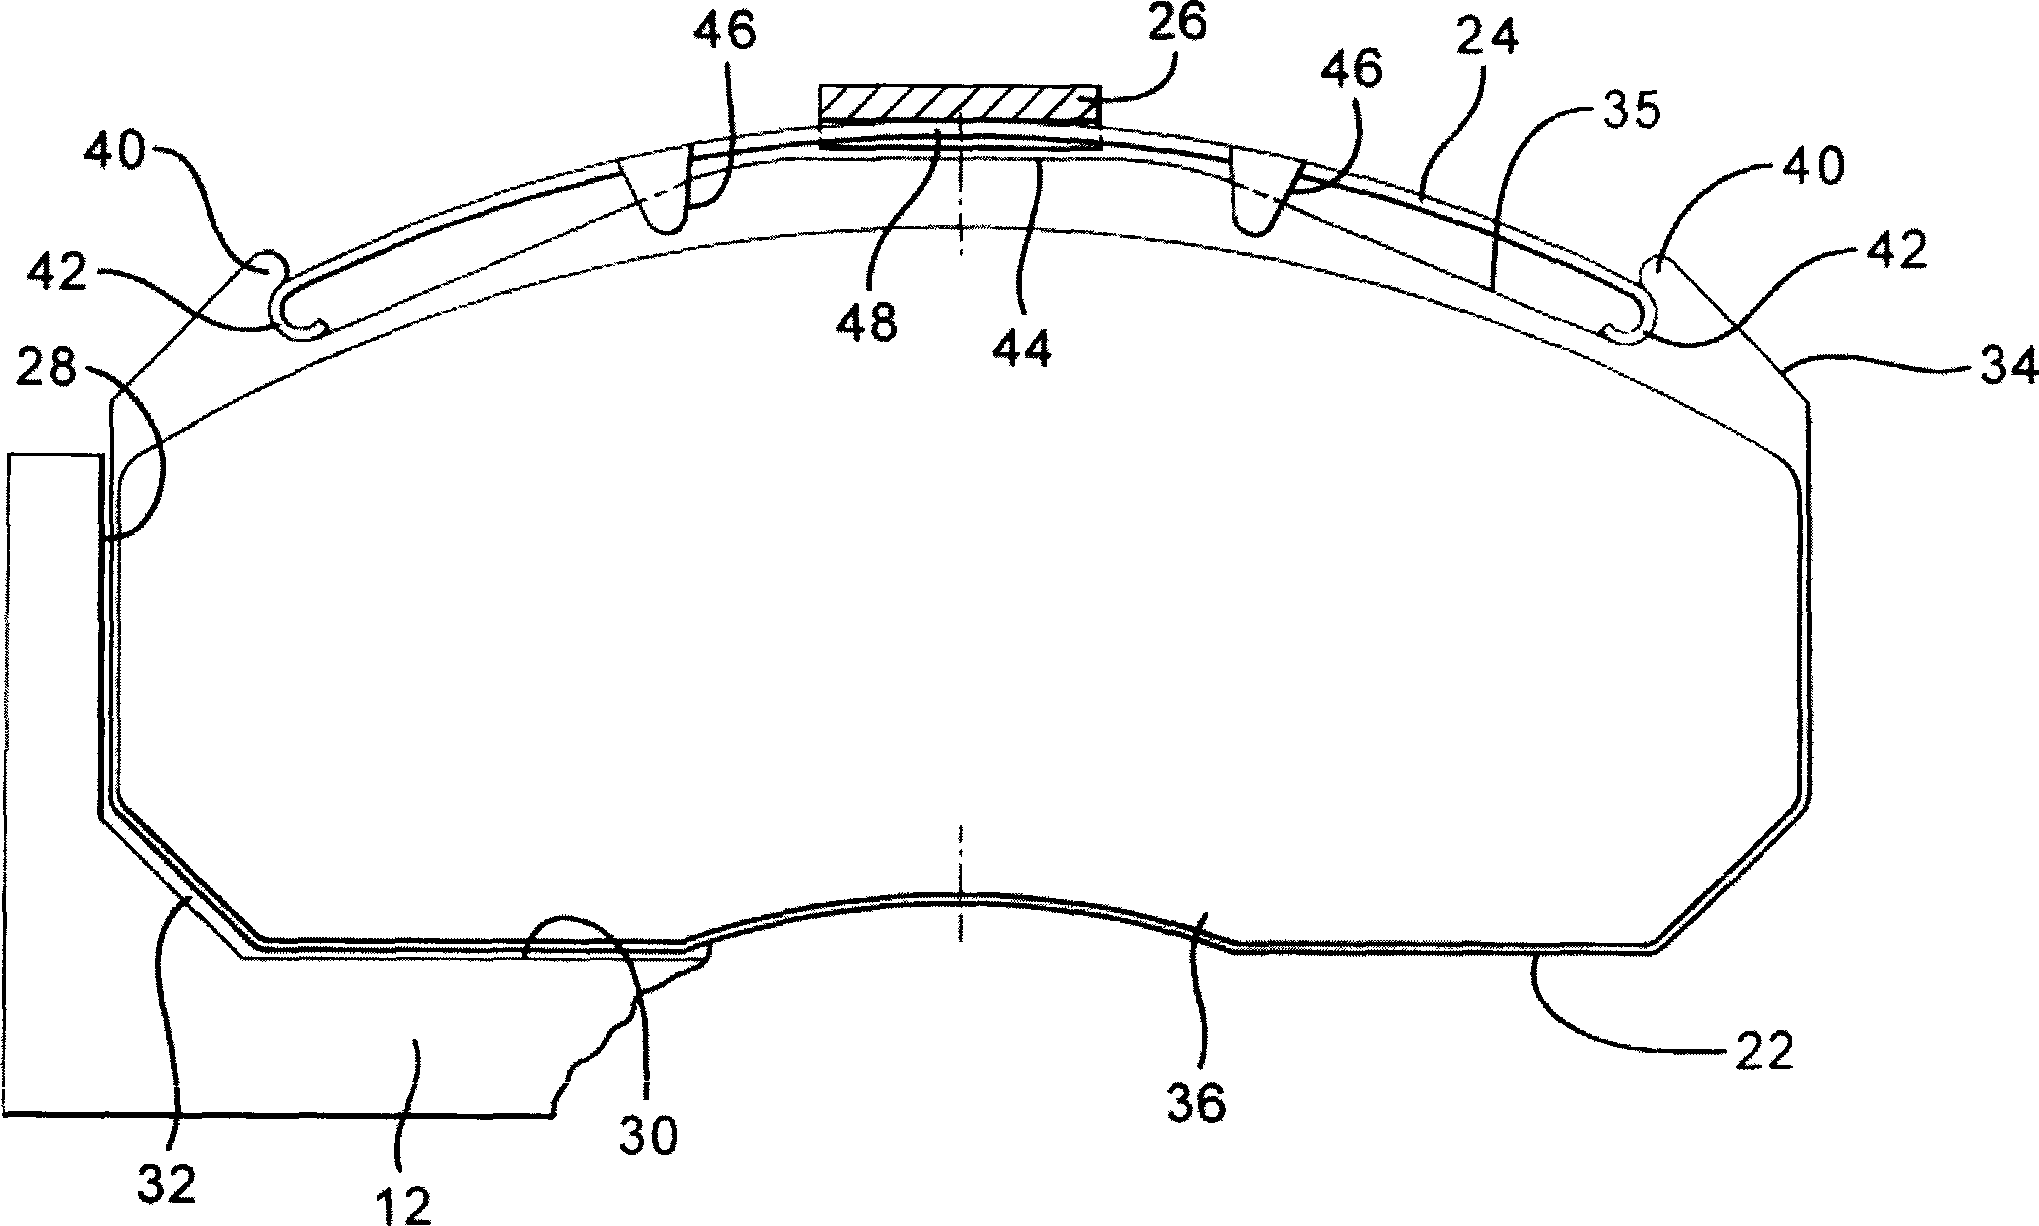 Rear plate assembly of disc brake block